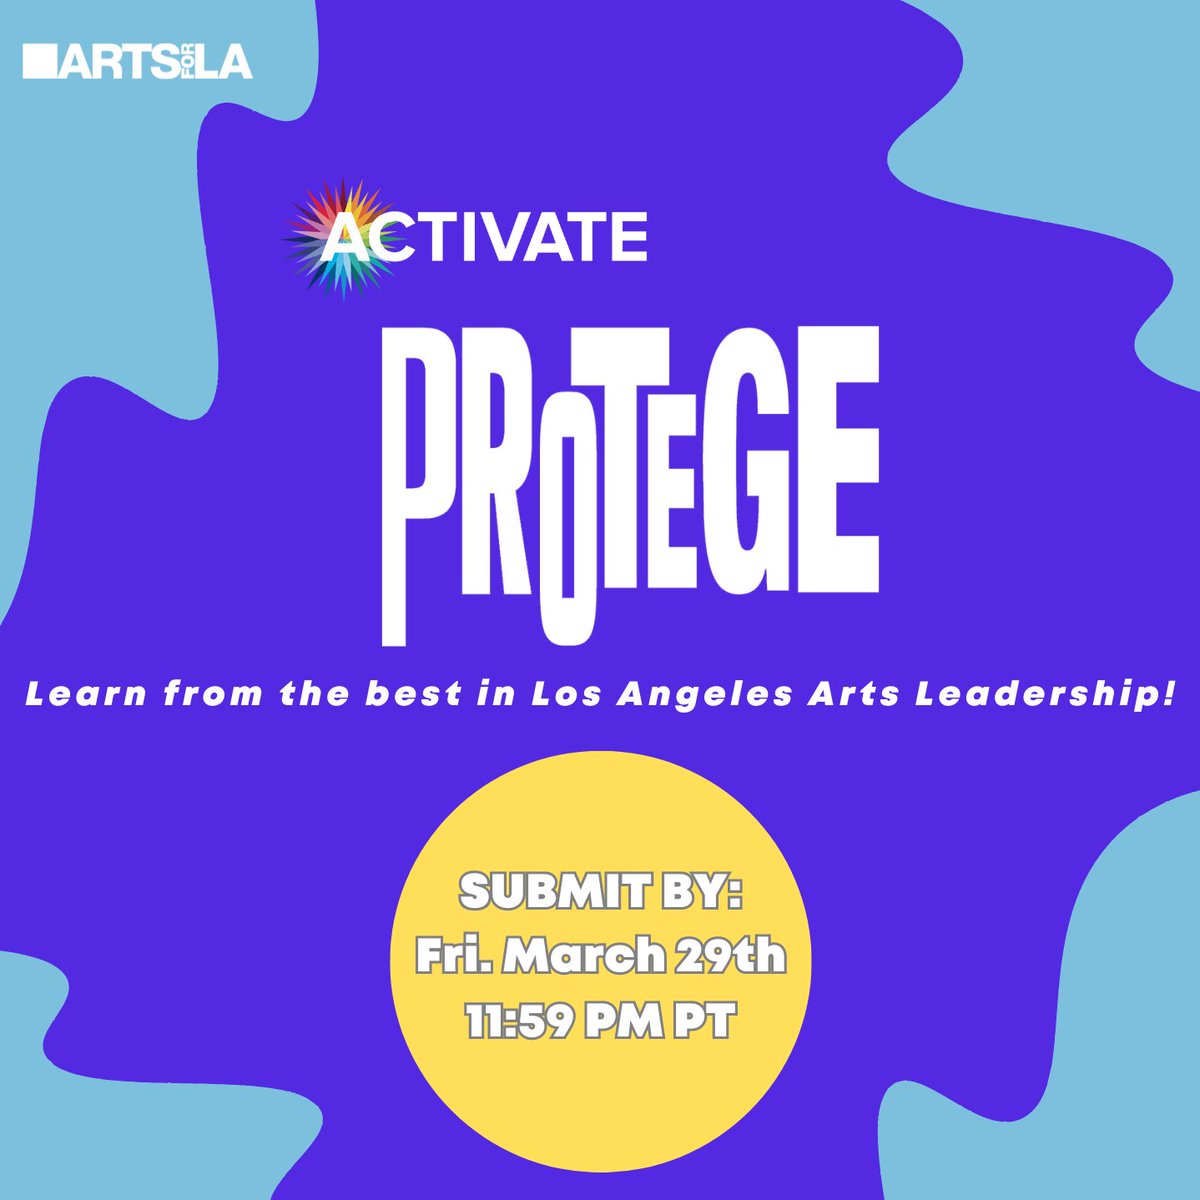 Did you apply yet ❓ . ACTIVATE Protege is a 7-month mentorship program that pairs up-and-coming arts leaders with industry professionals. . If you seek industry insight, a knowledgeable sounding board, and want to grow your network, apply now! ⌛ artsforla.org/activate/prote…